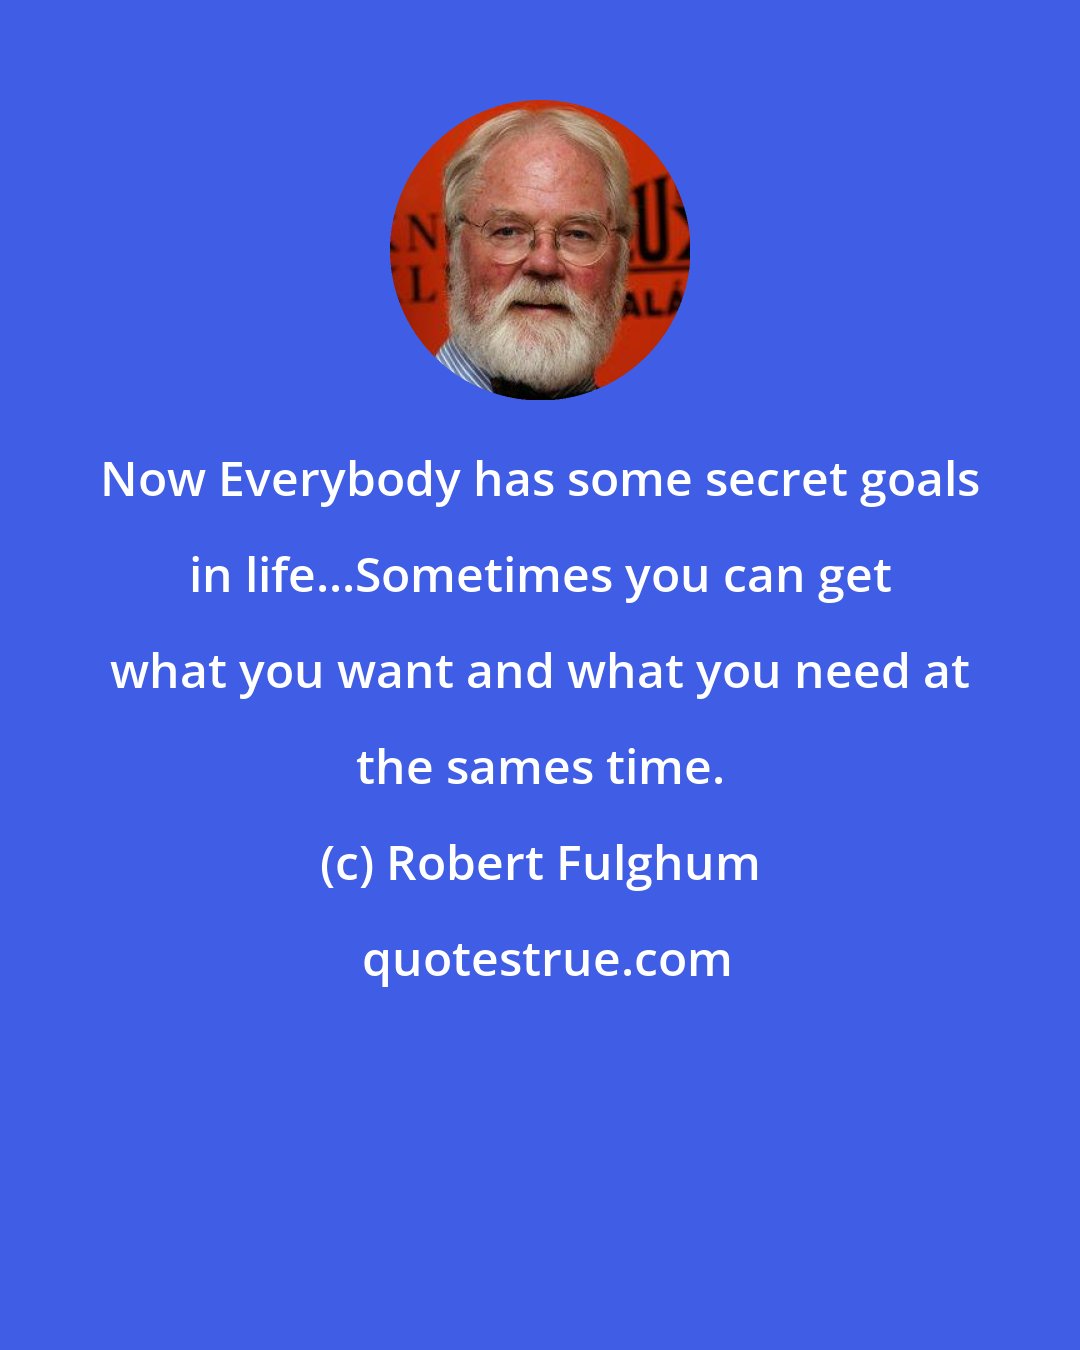 Robert Fulghum: Now Everybody has some secret goals in life...Sometimes you can get what you want and what you need at the sames time.